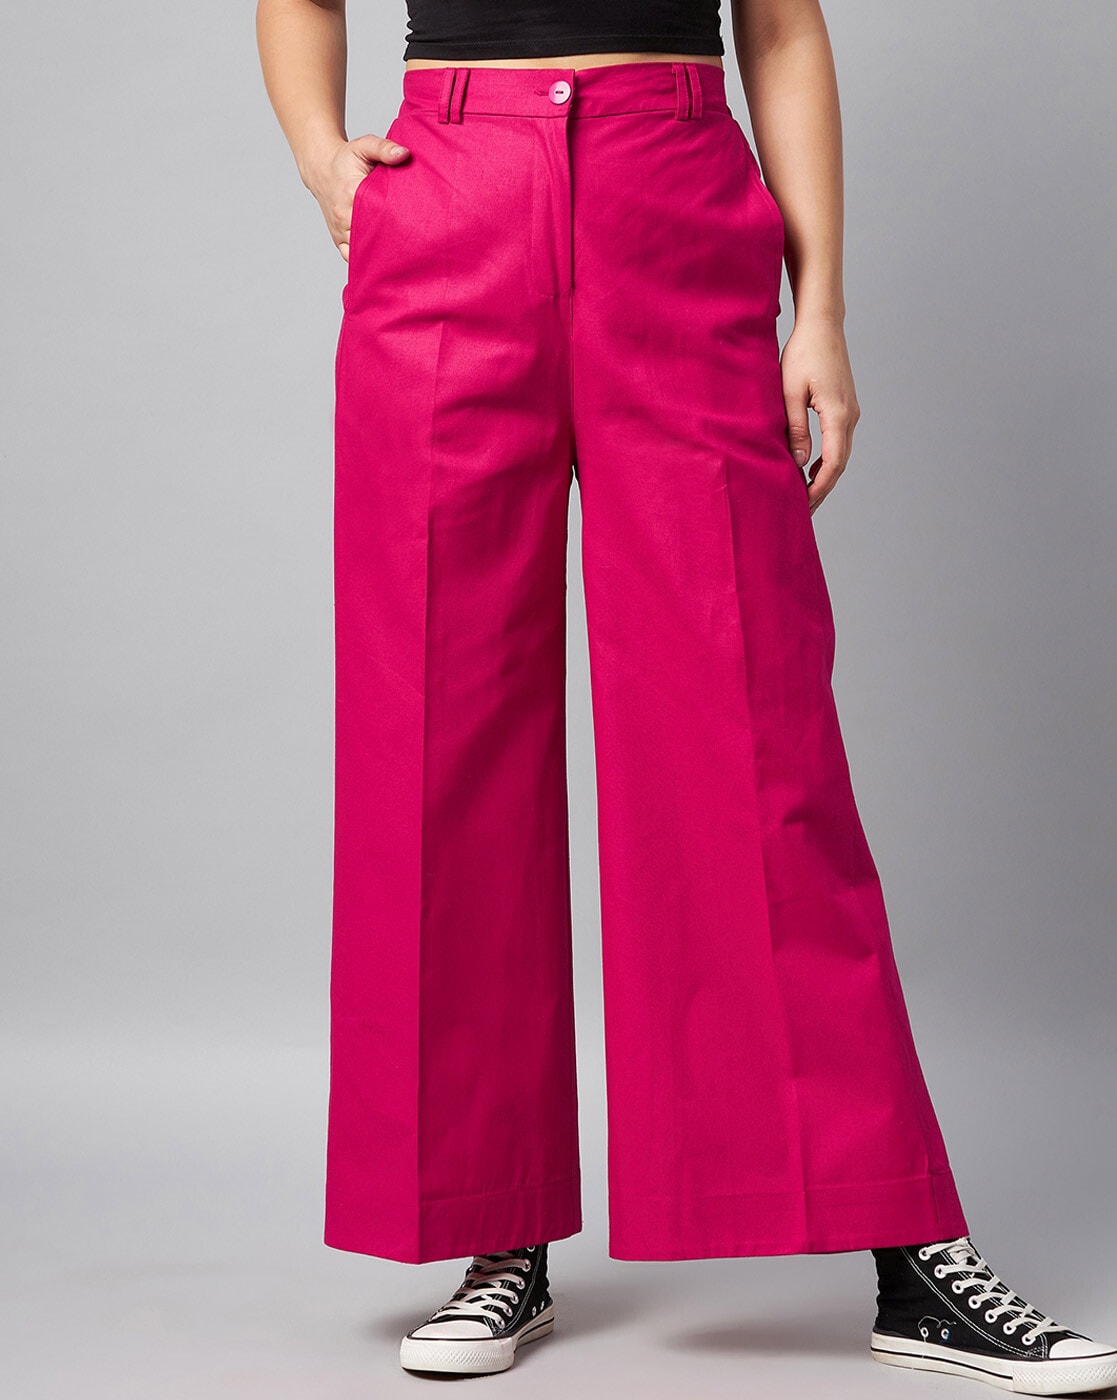 Hot Pink Plisse High Waisted Wide Leg Trousers  PrettyLittleThing